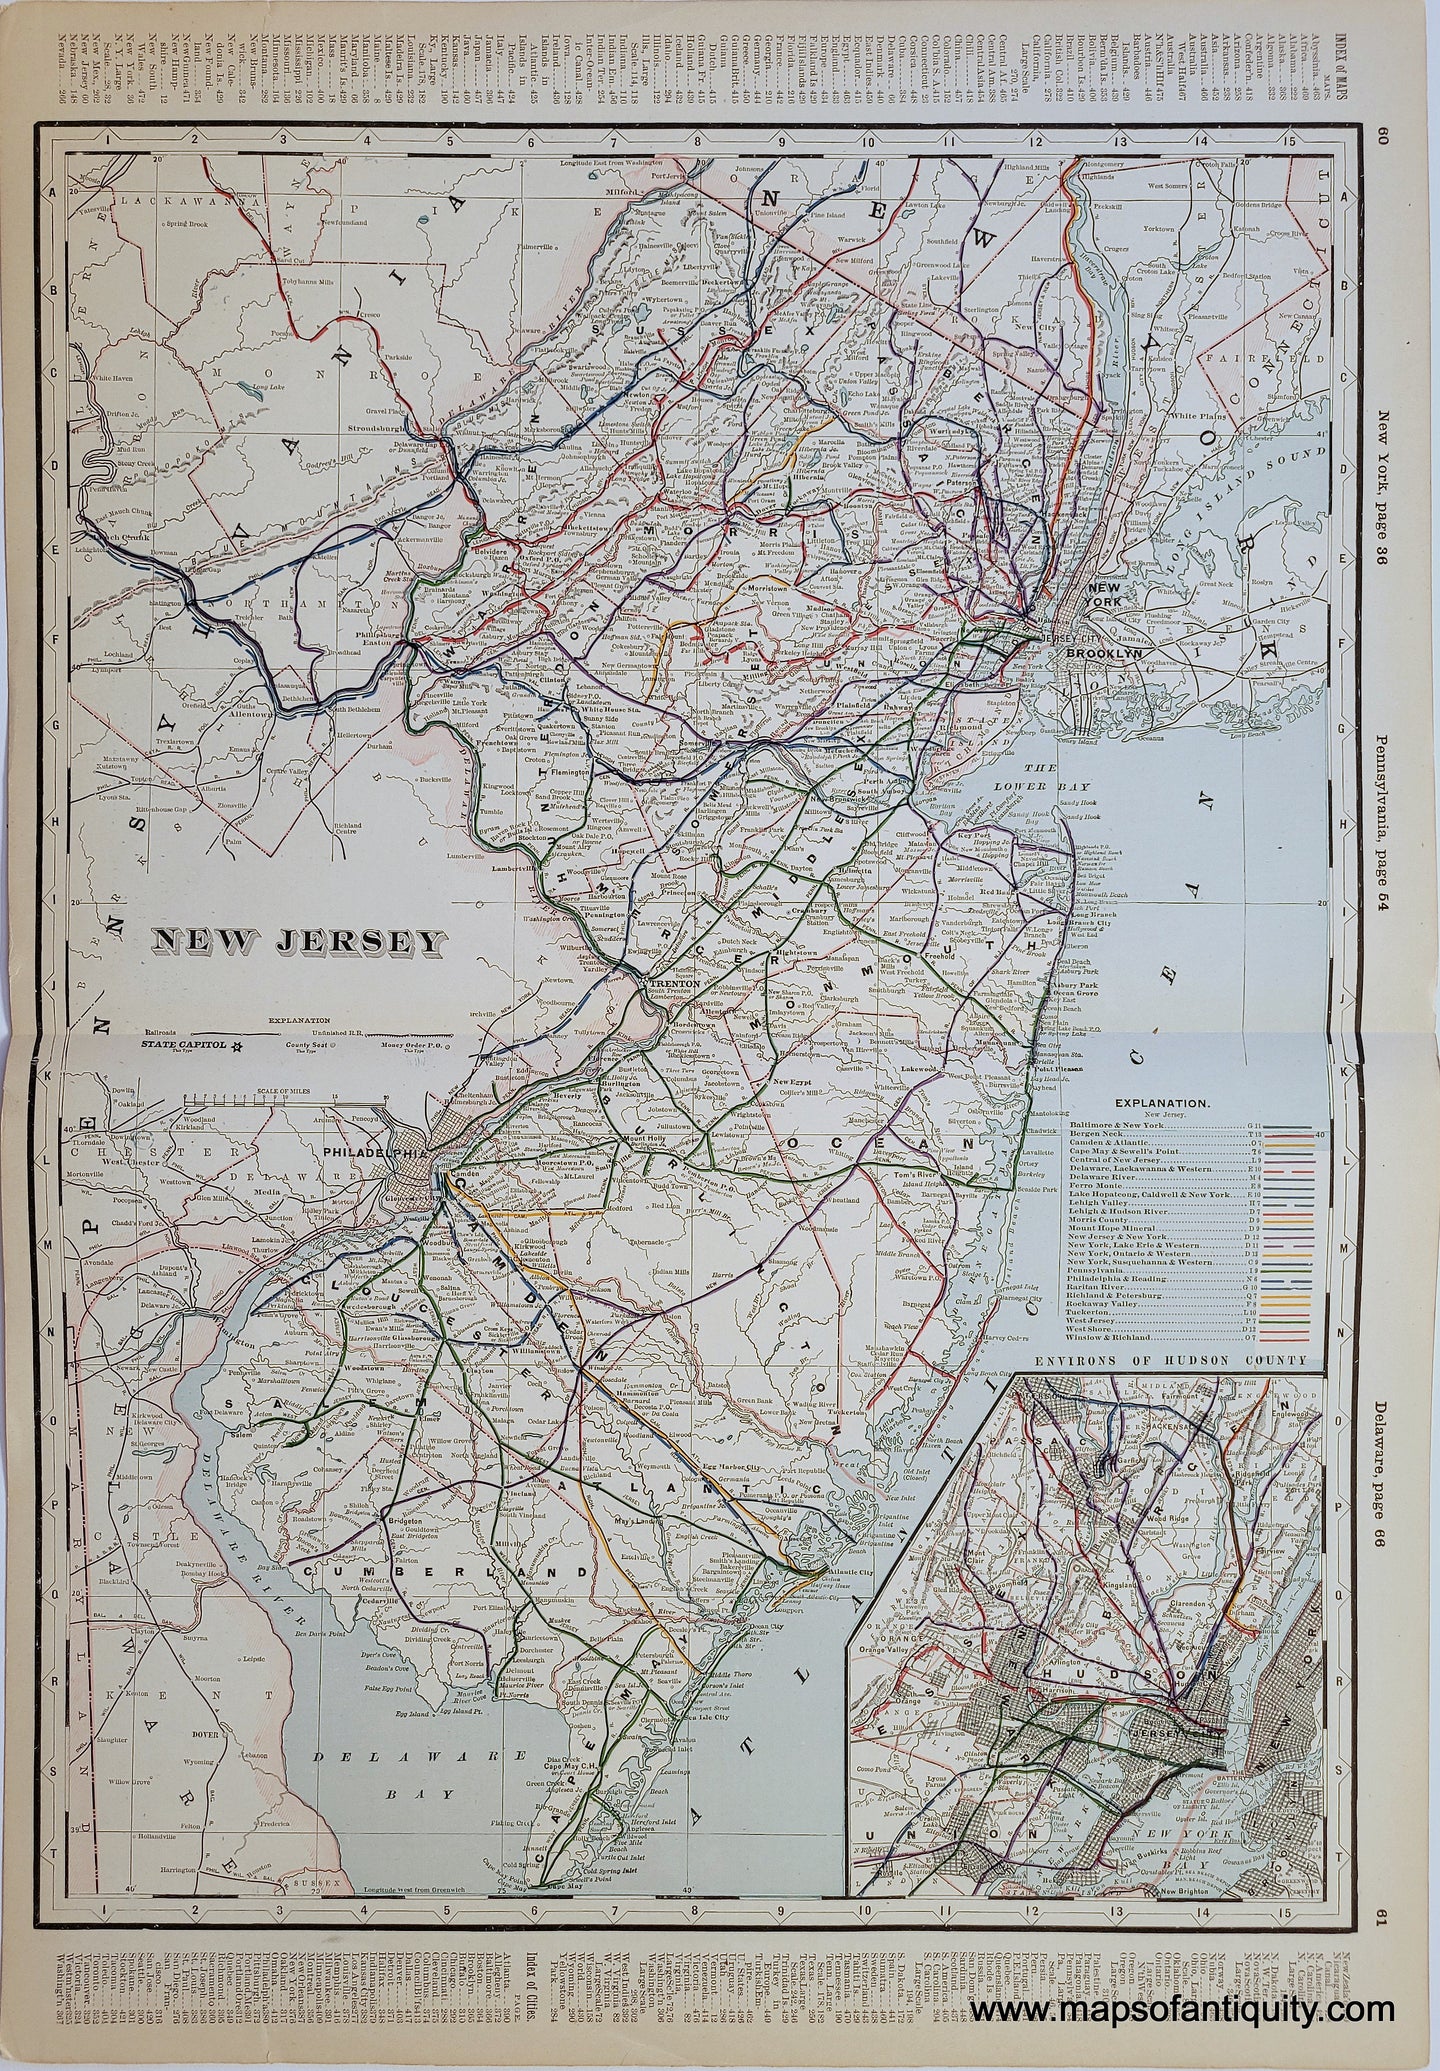 Antique map of the state of New Jersey with printed color. It shows all of the railroads in different colors, creating a rainbow network of railroads